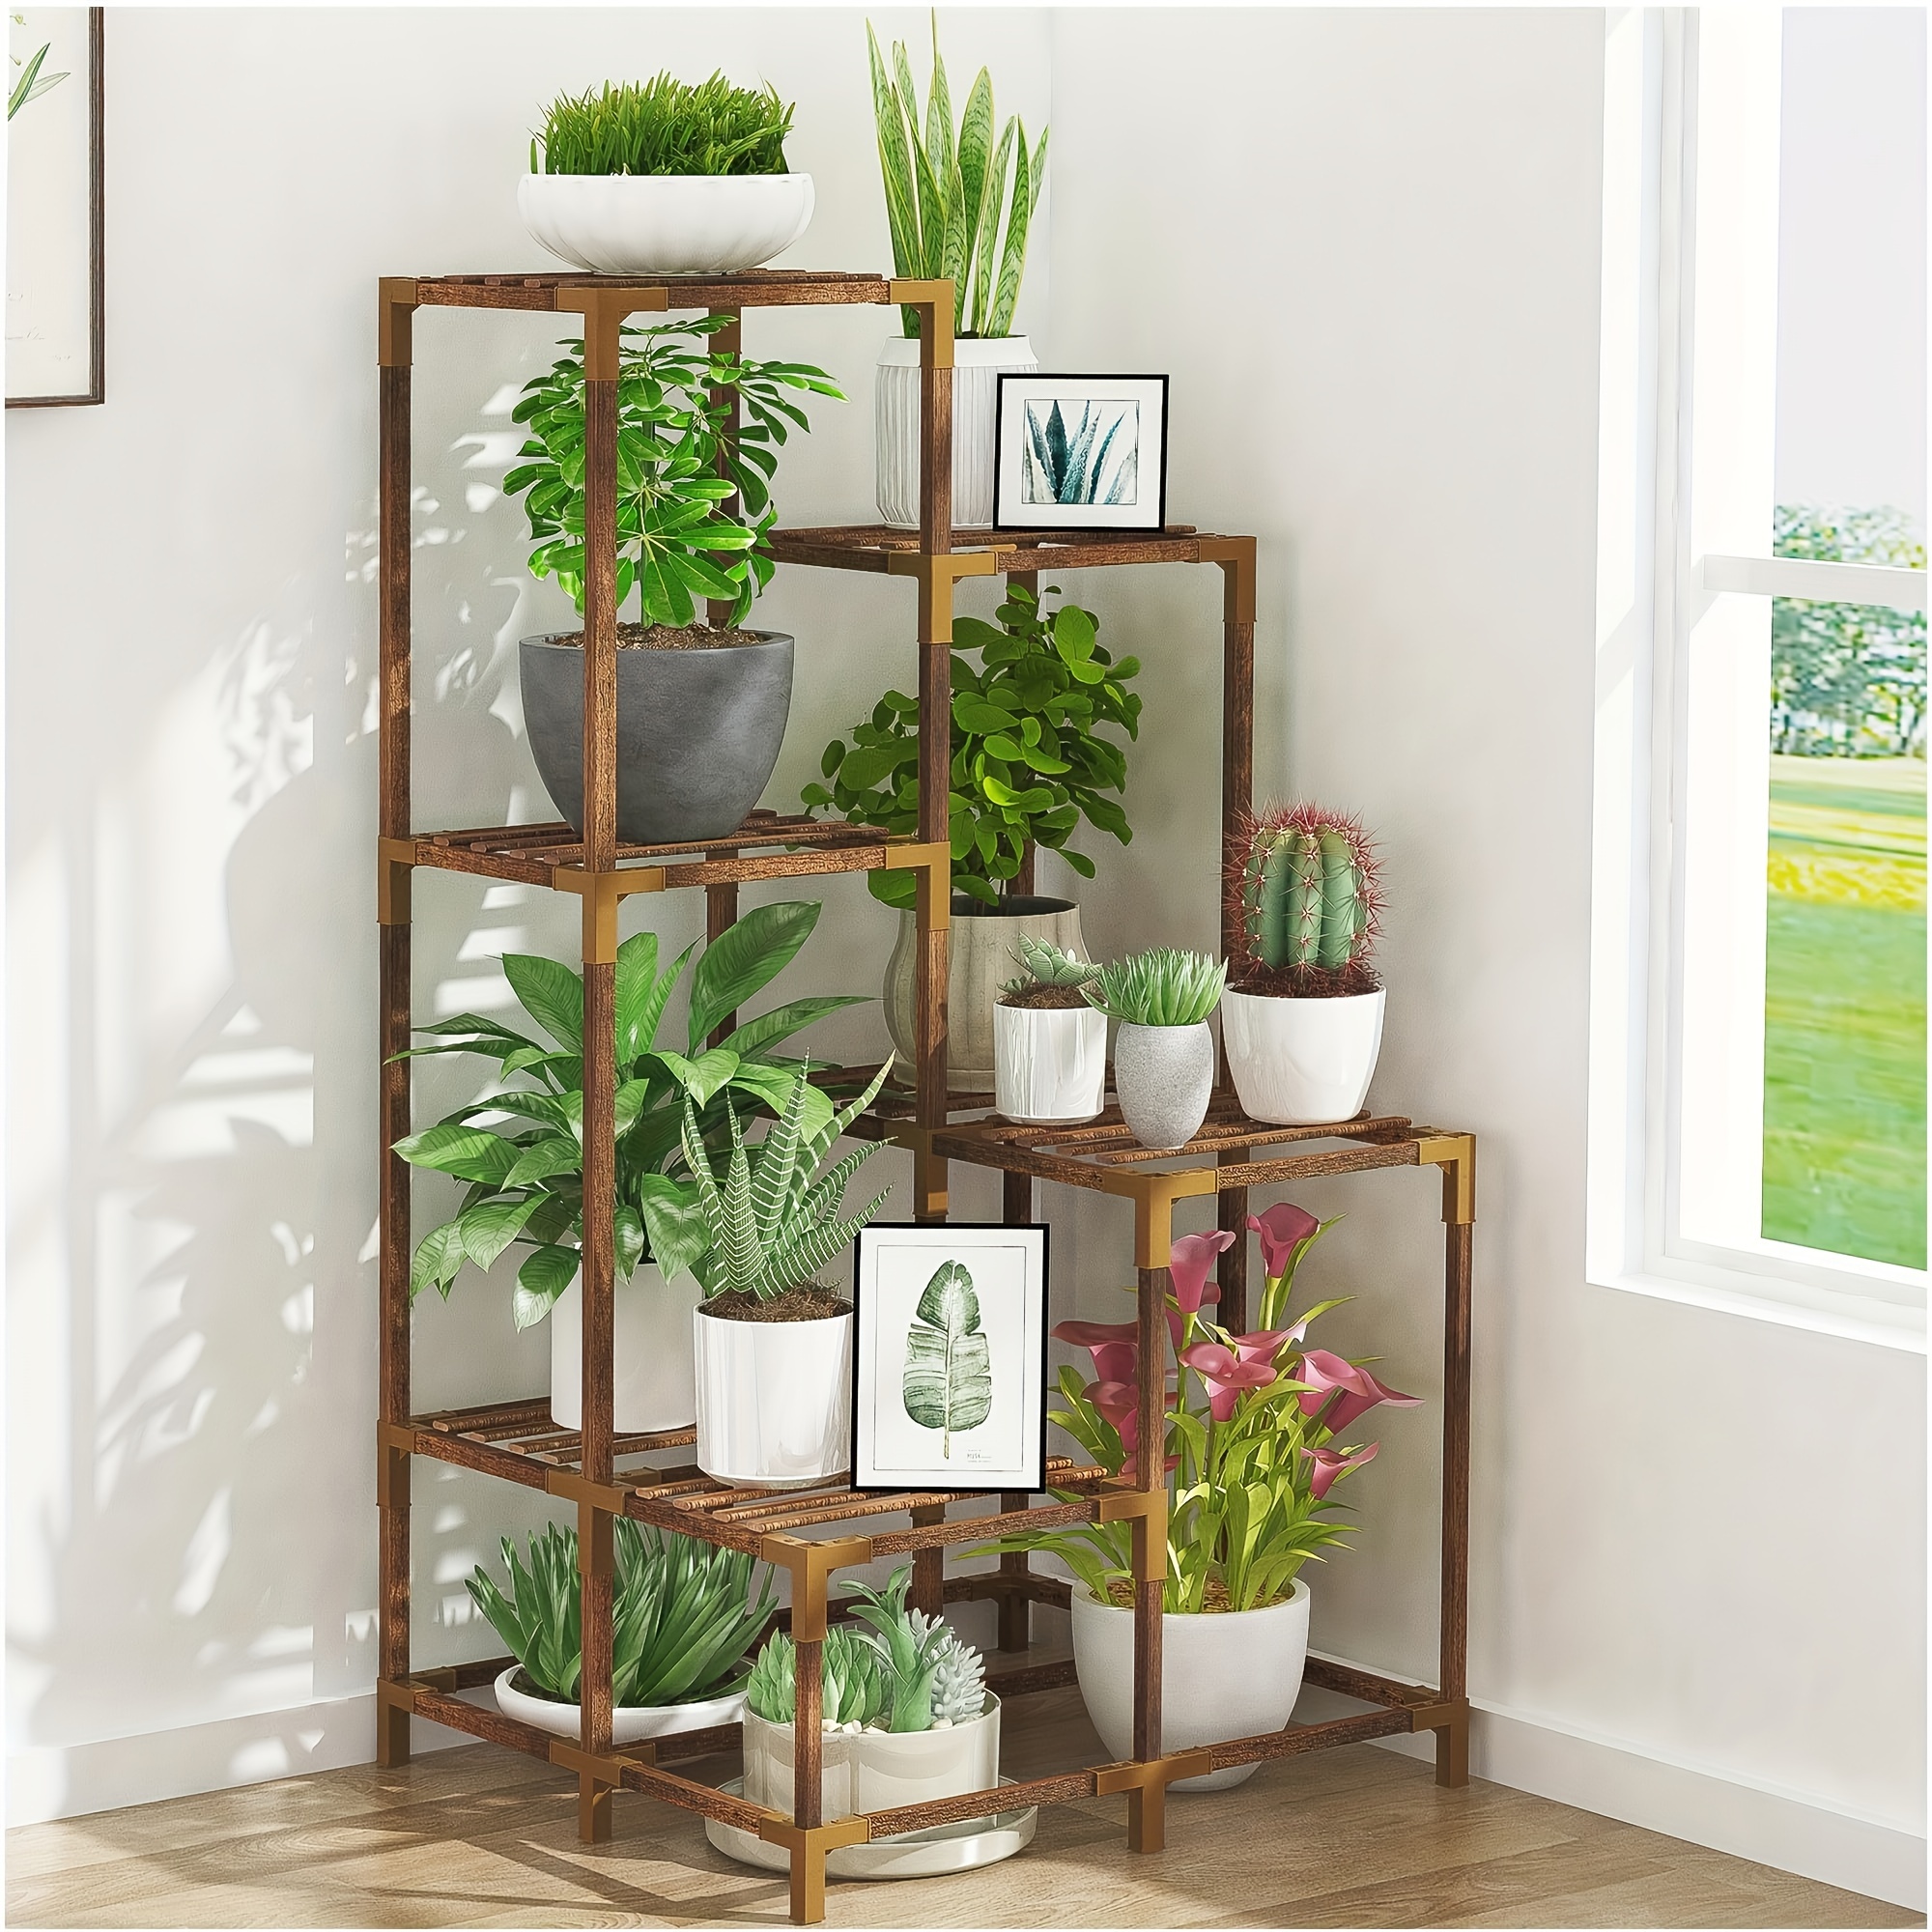 

1pc 7-tier Corner Flower Stand That Can Hold Multiple Potted Plants, 40-inch Tall Flower Stand Suitable For Courtyard Gardens, Balconies, And Window, For Home Room Living Room Office Decor